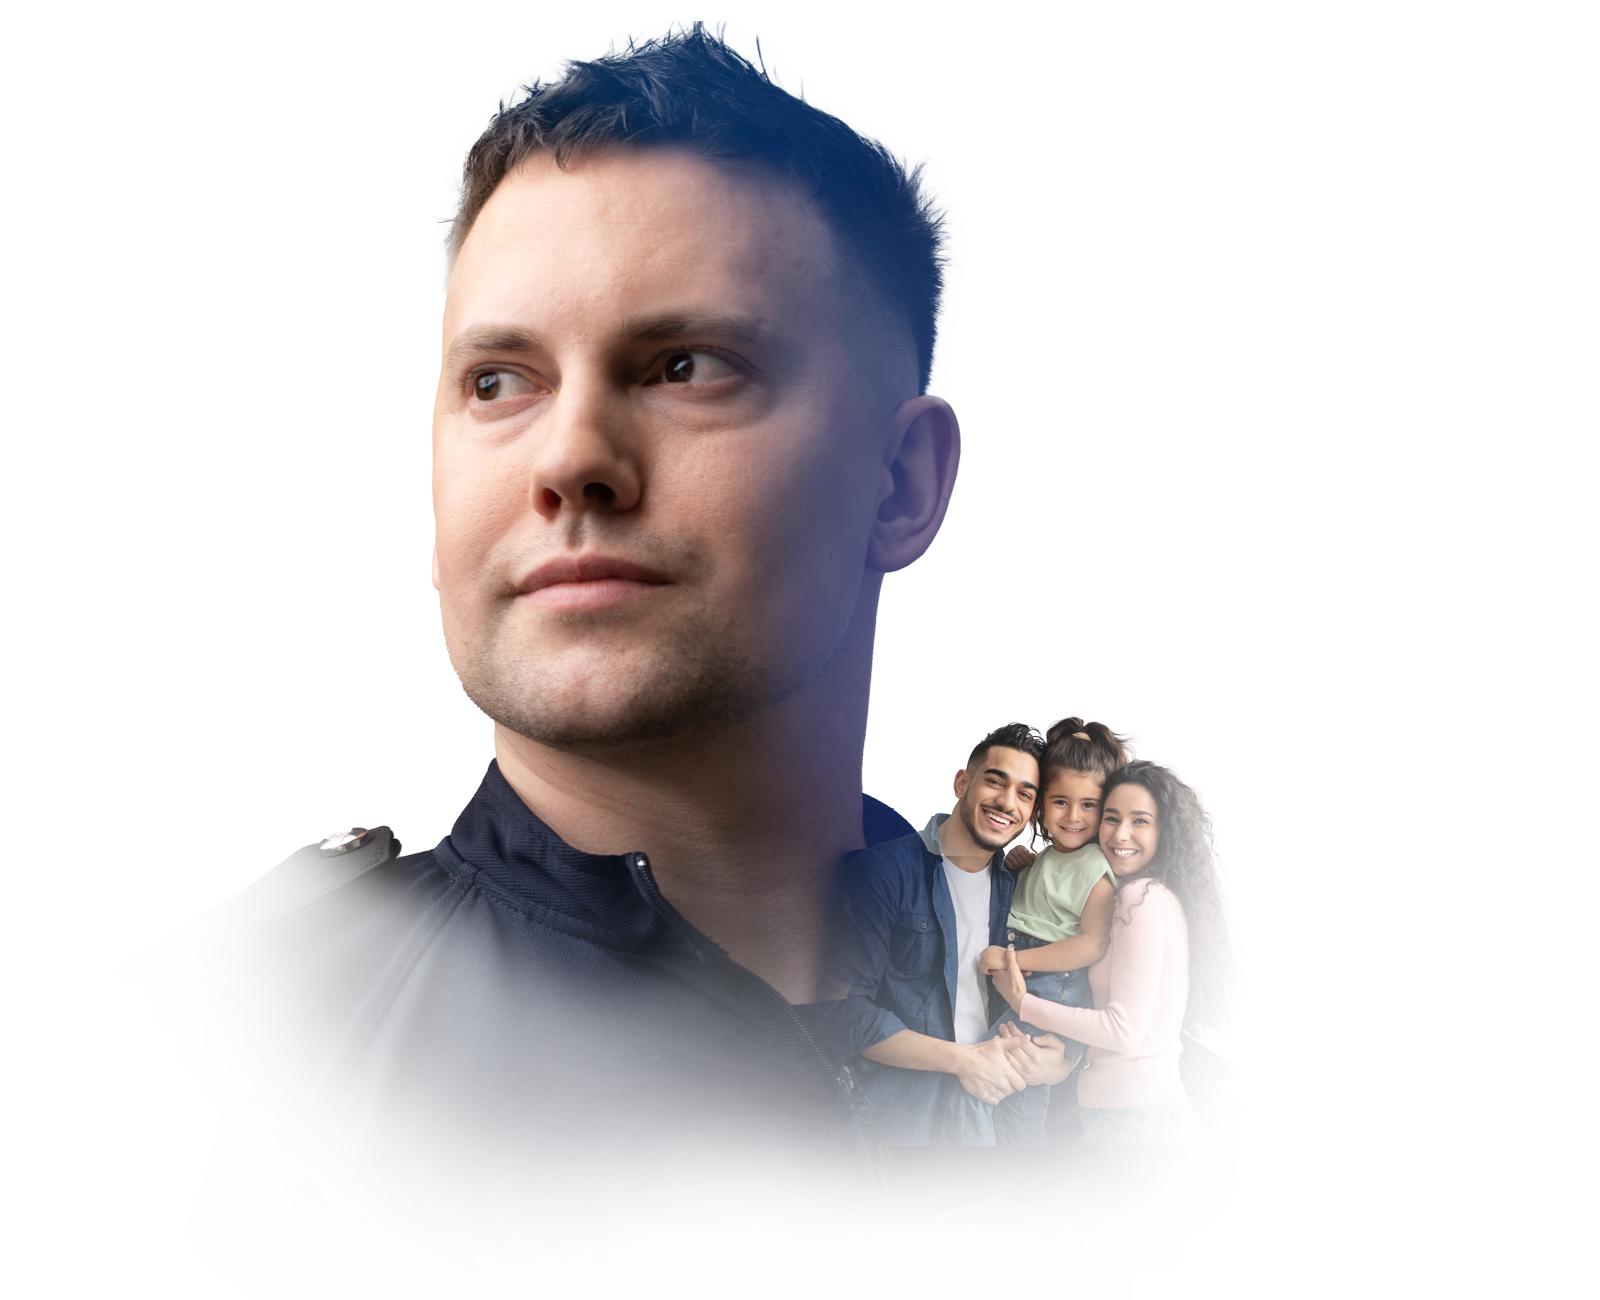 Member of Home Office staff with image of a family superimposed